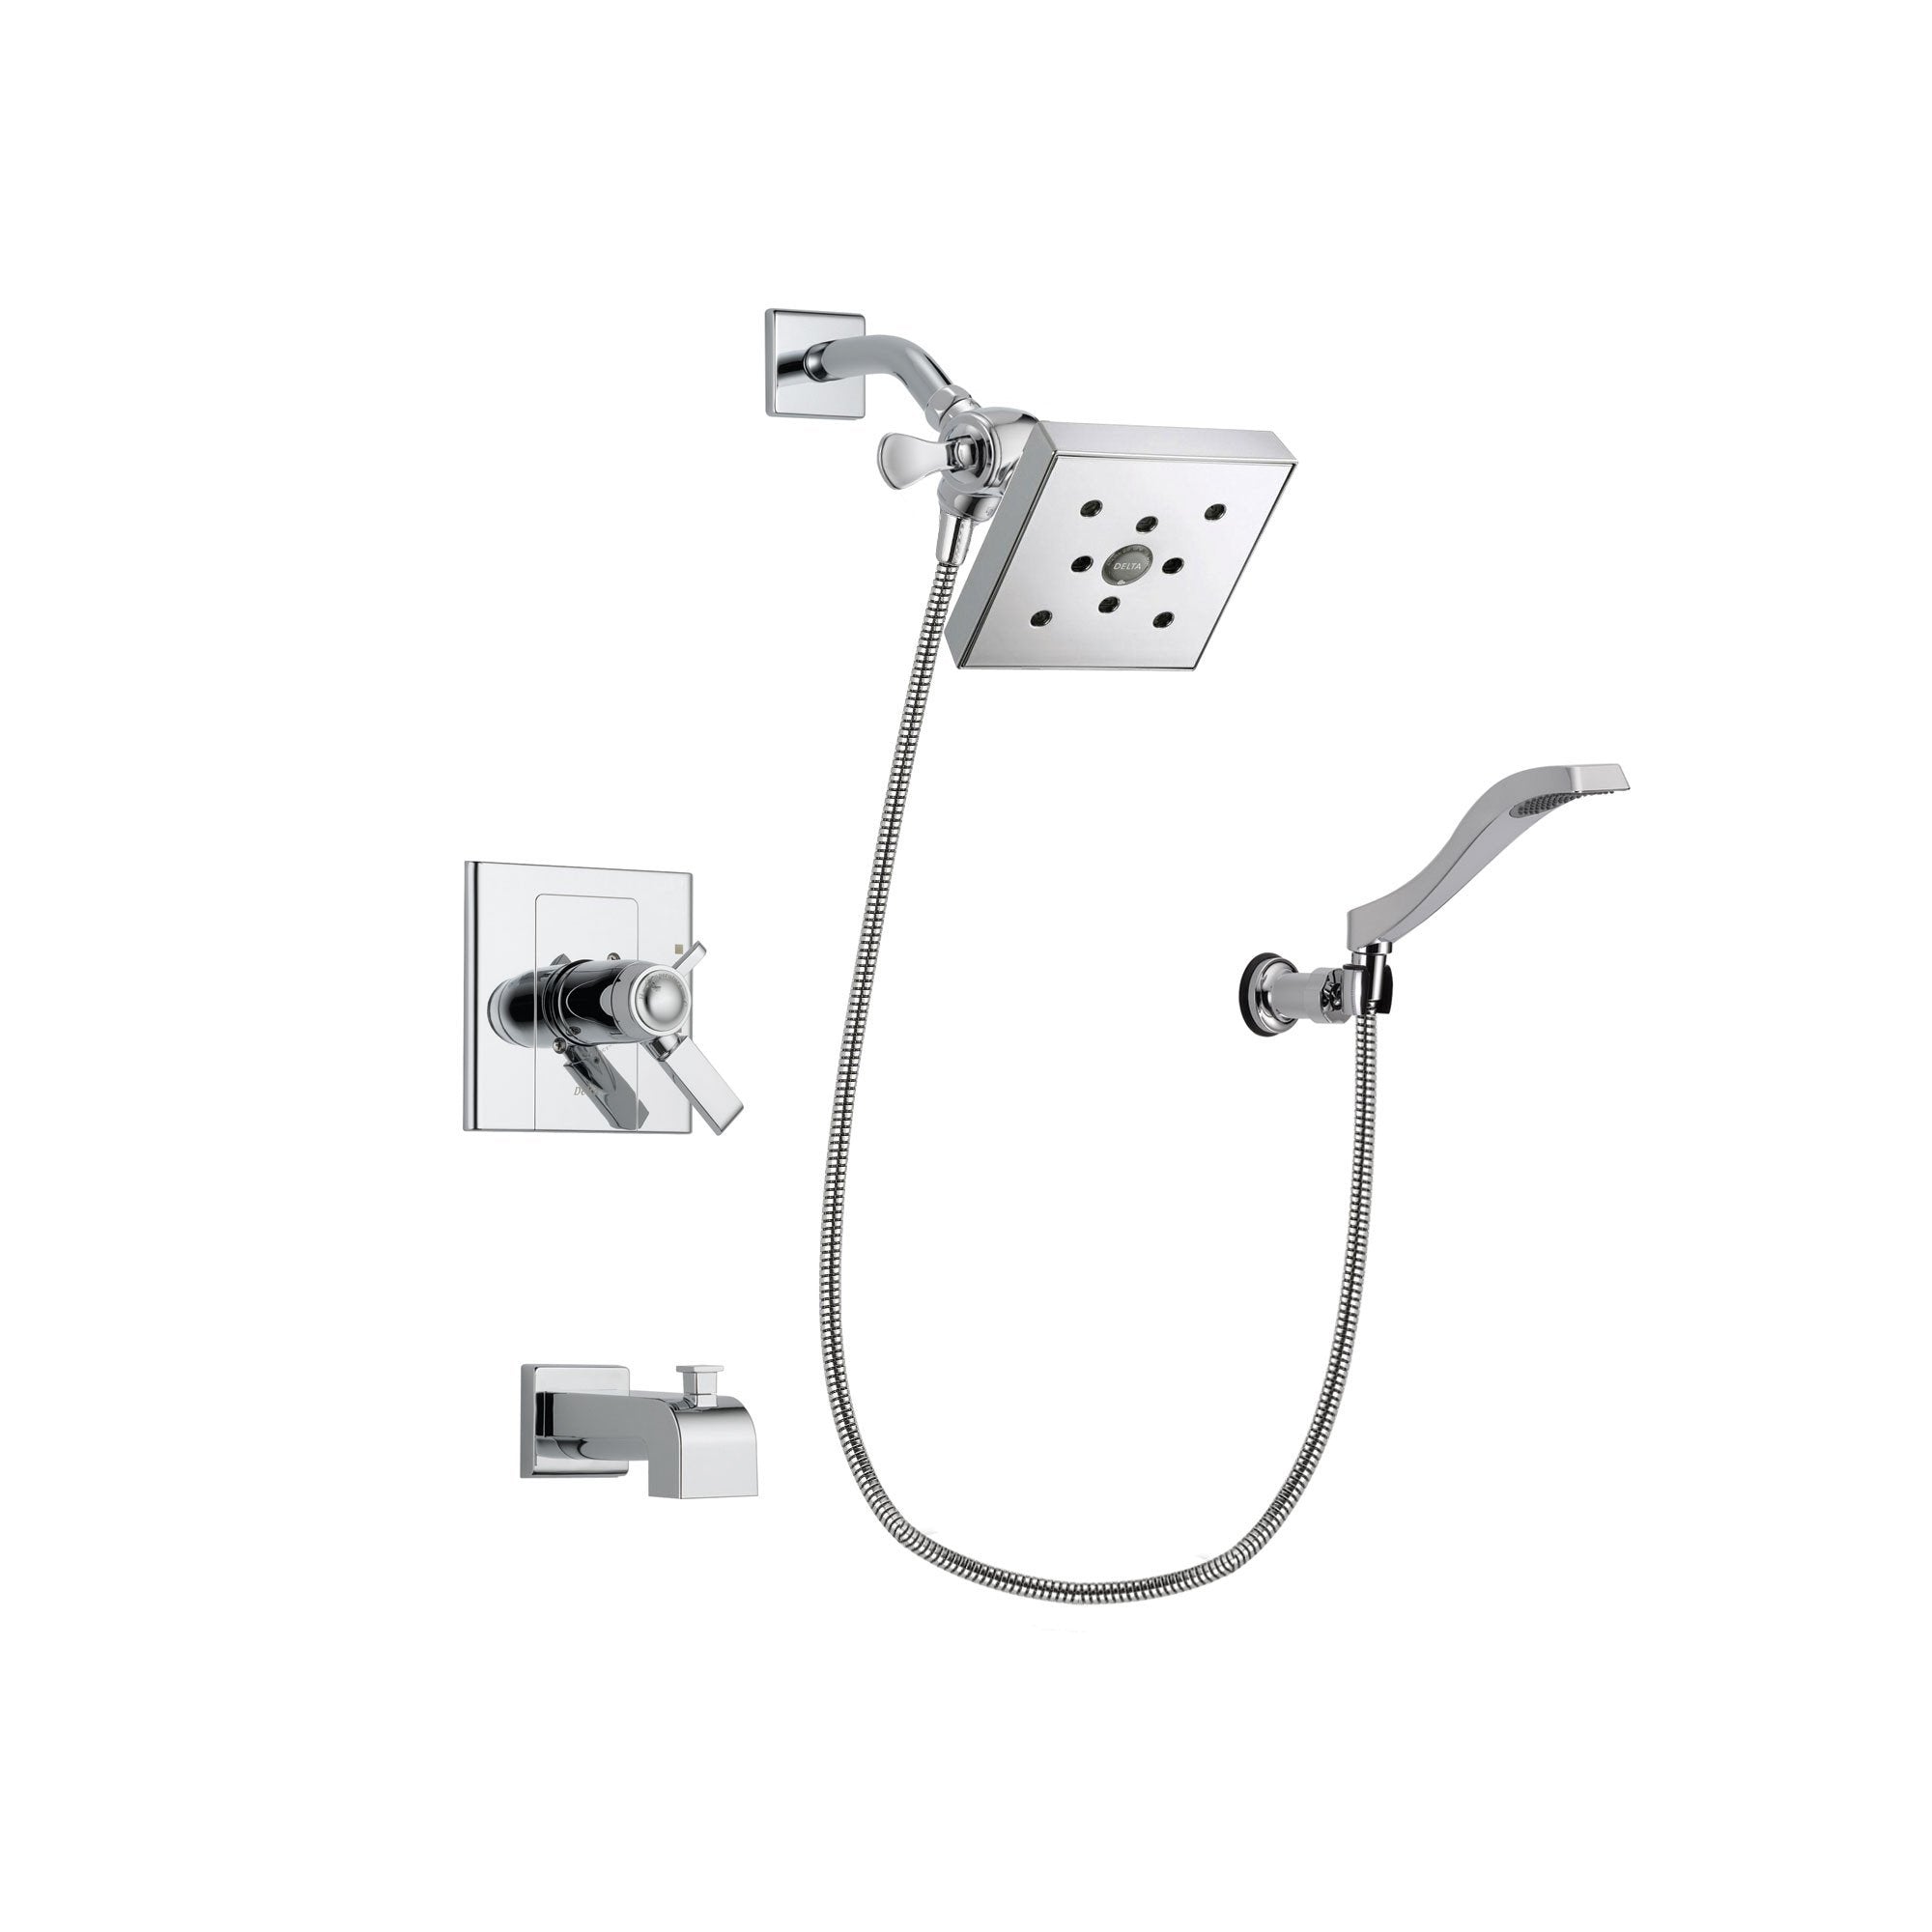 Delta Arzo Chrome Finish Thermostatic Tub and Shower Faucet System Package with Square Shower Head and Modern Handheld Shower Spray with Wall Bracket and Hose Includes Rough-in Valve and Tub Spout DSP0038V